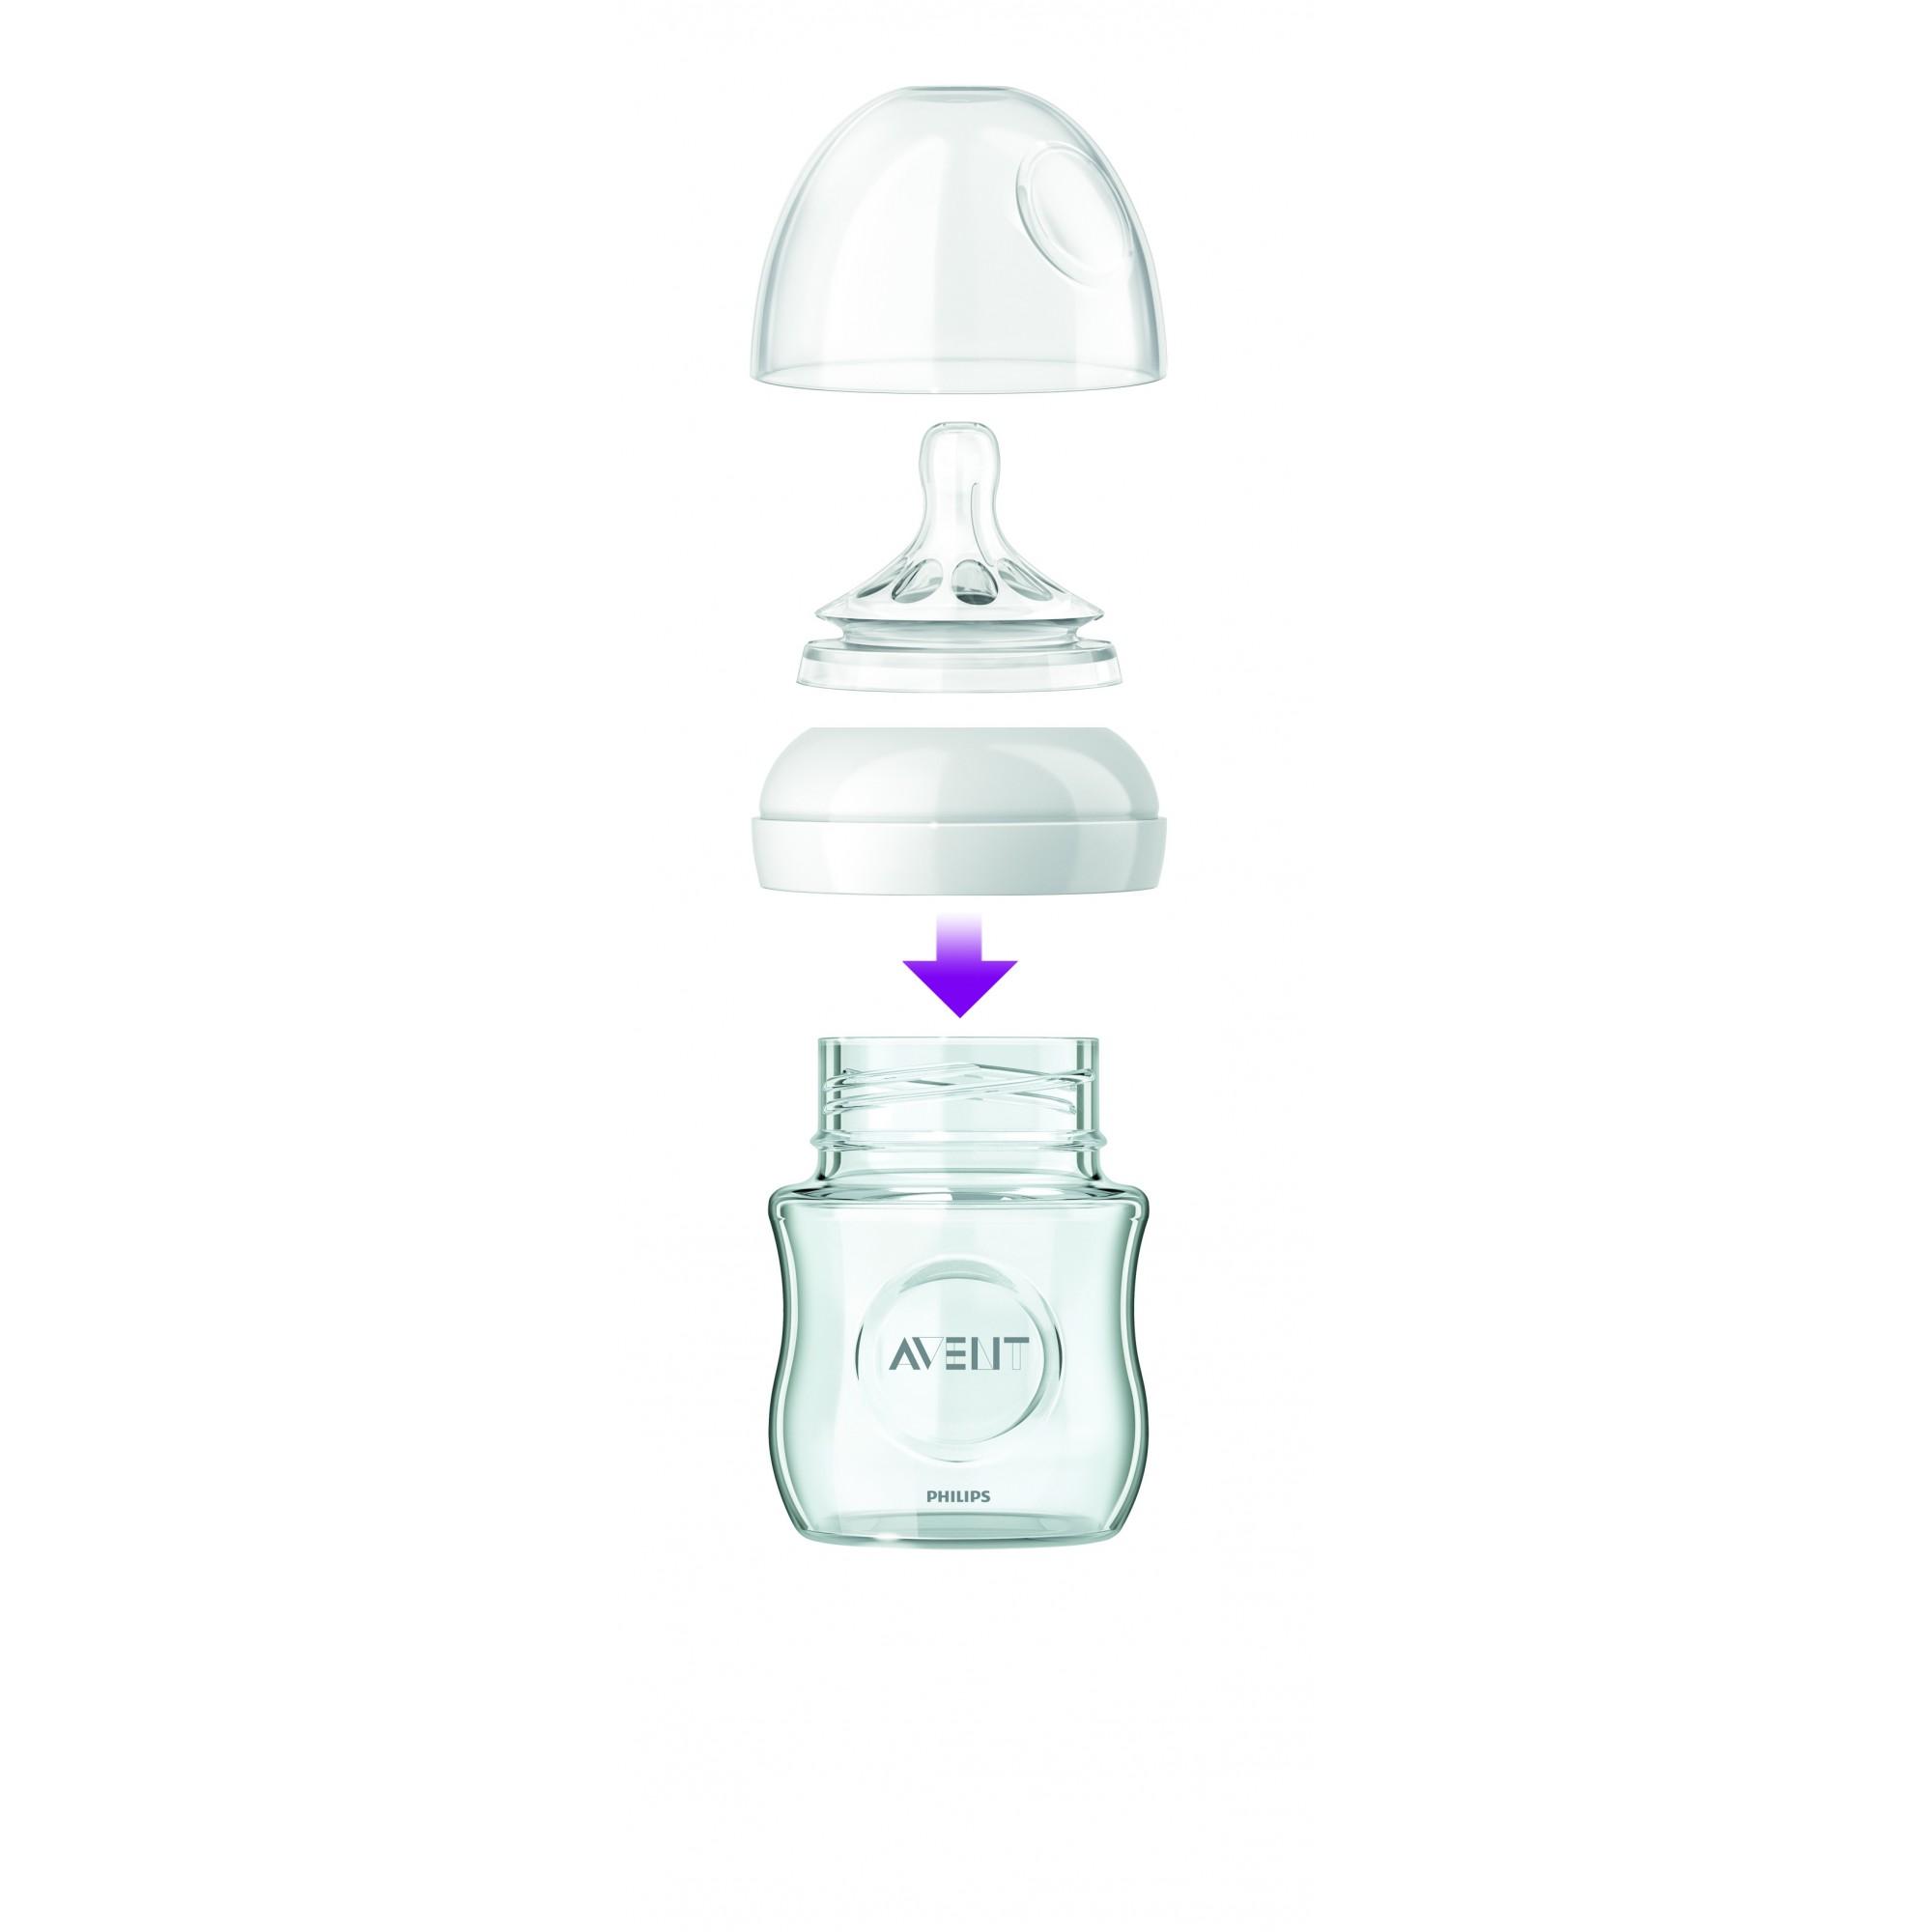 Philips Avent Natural Glass Bottle, 1 Count, 4 Ounce - image 3 of 12